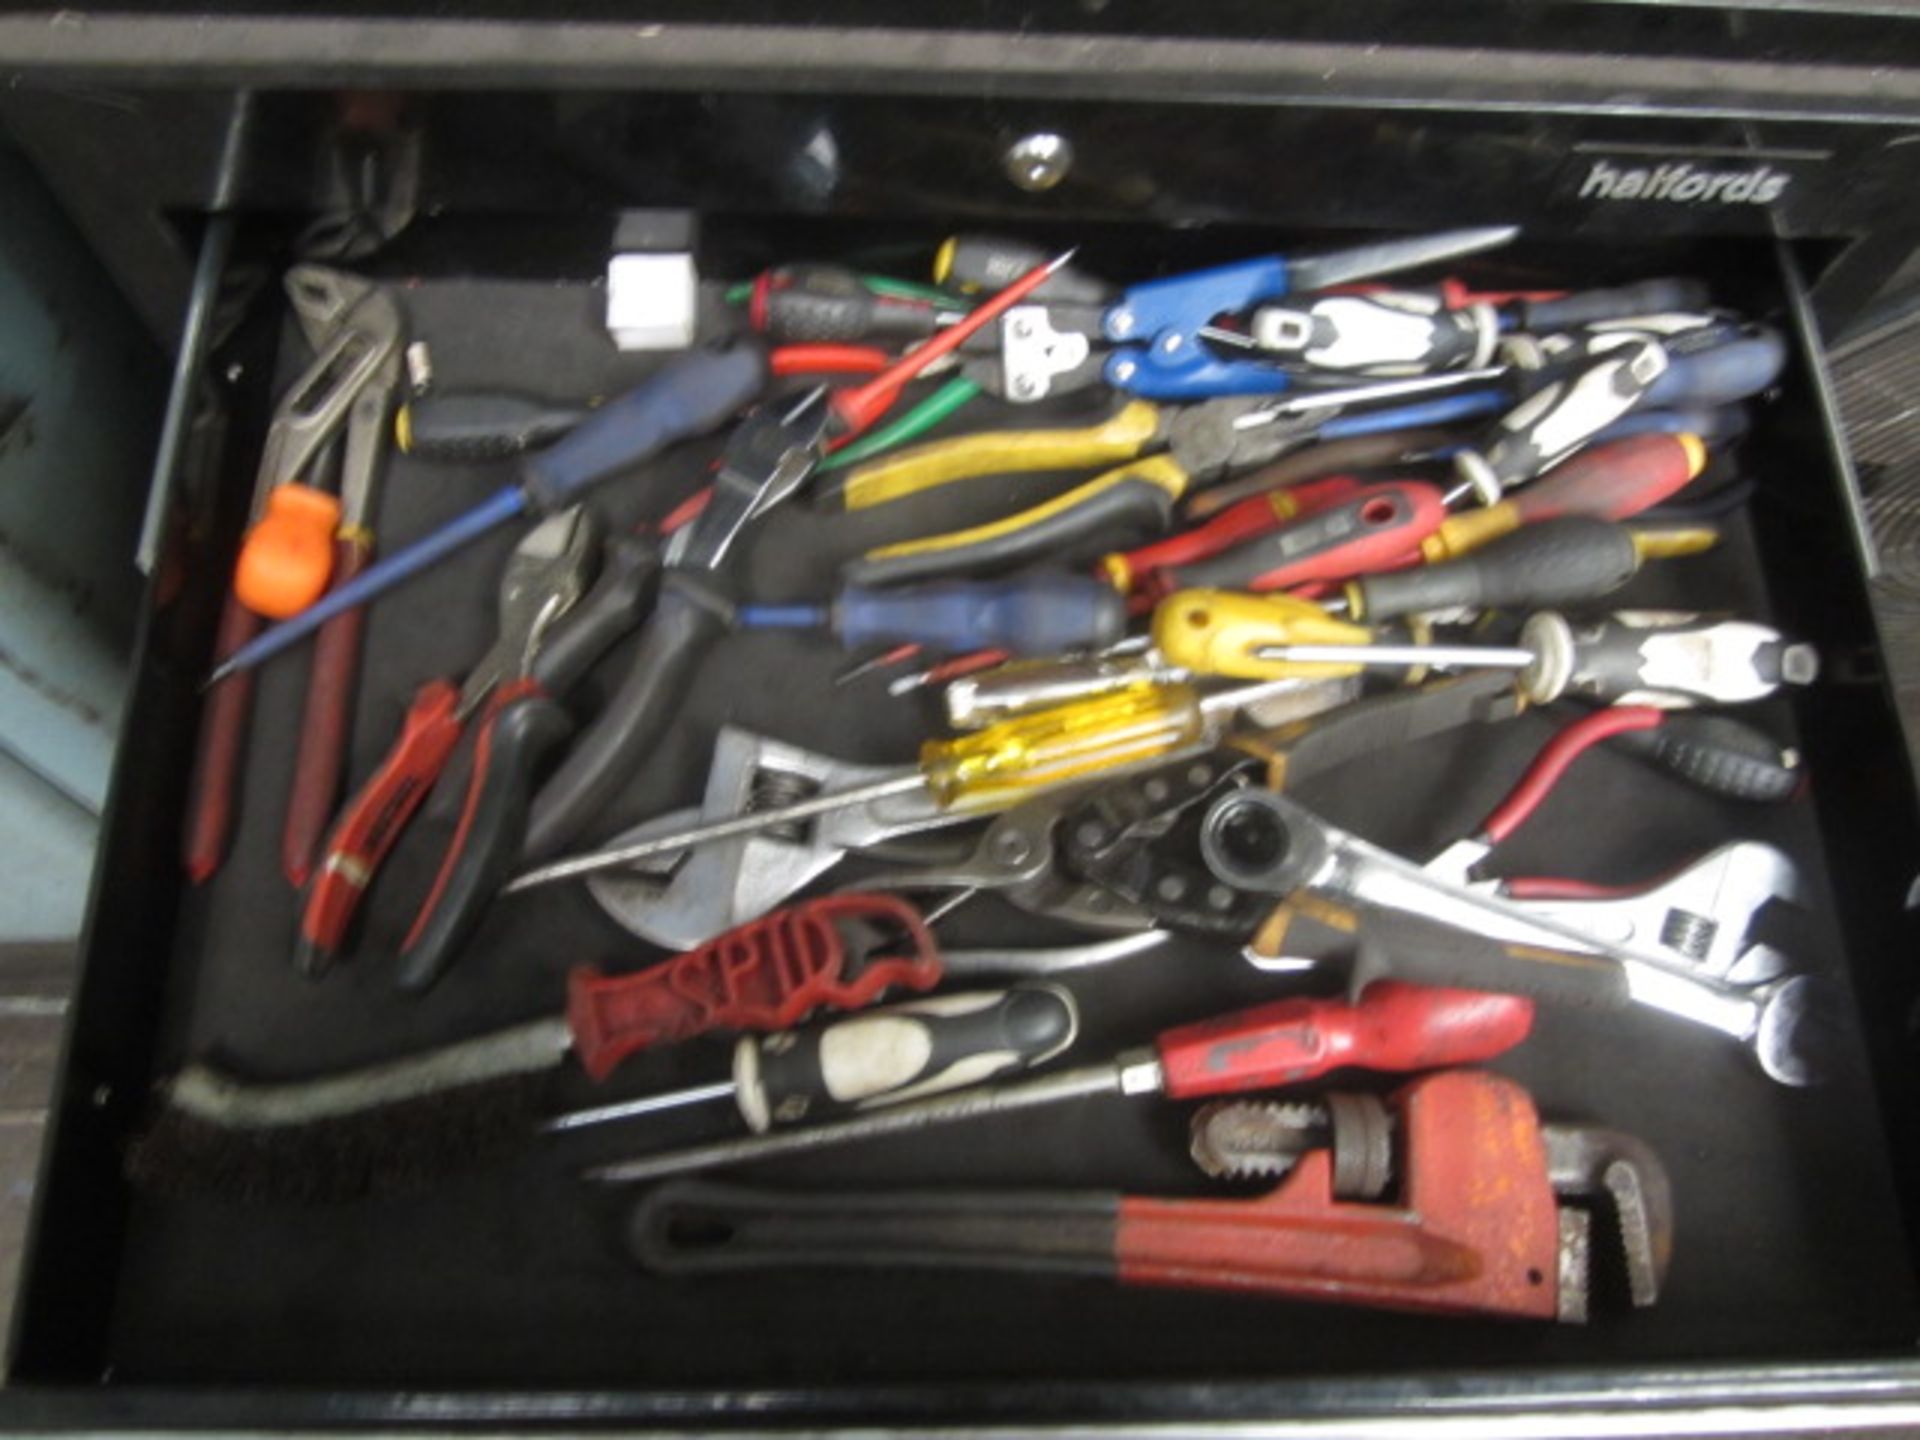 Halfords 13 drawer mobile tool chest with contents including assorted hand tools, cutters etc., as - Image 7 of 8